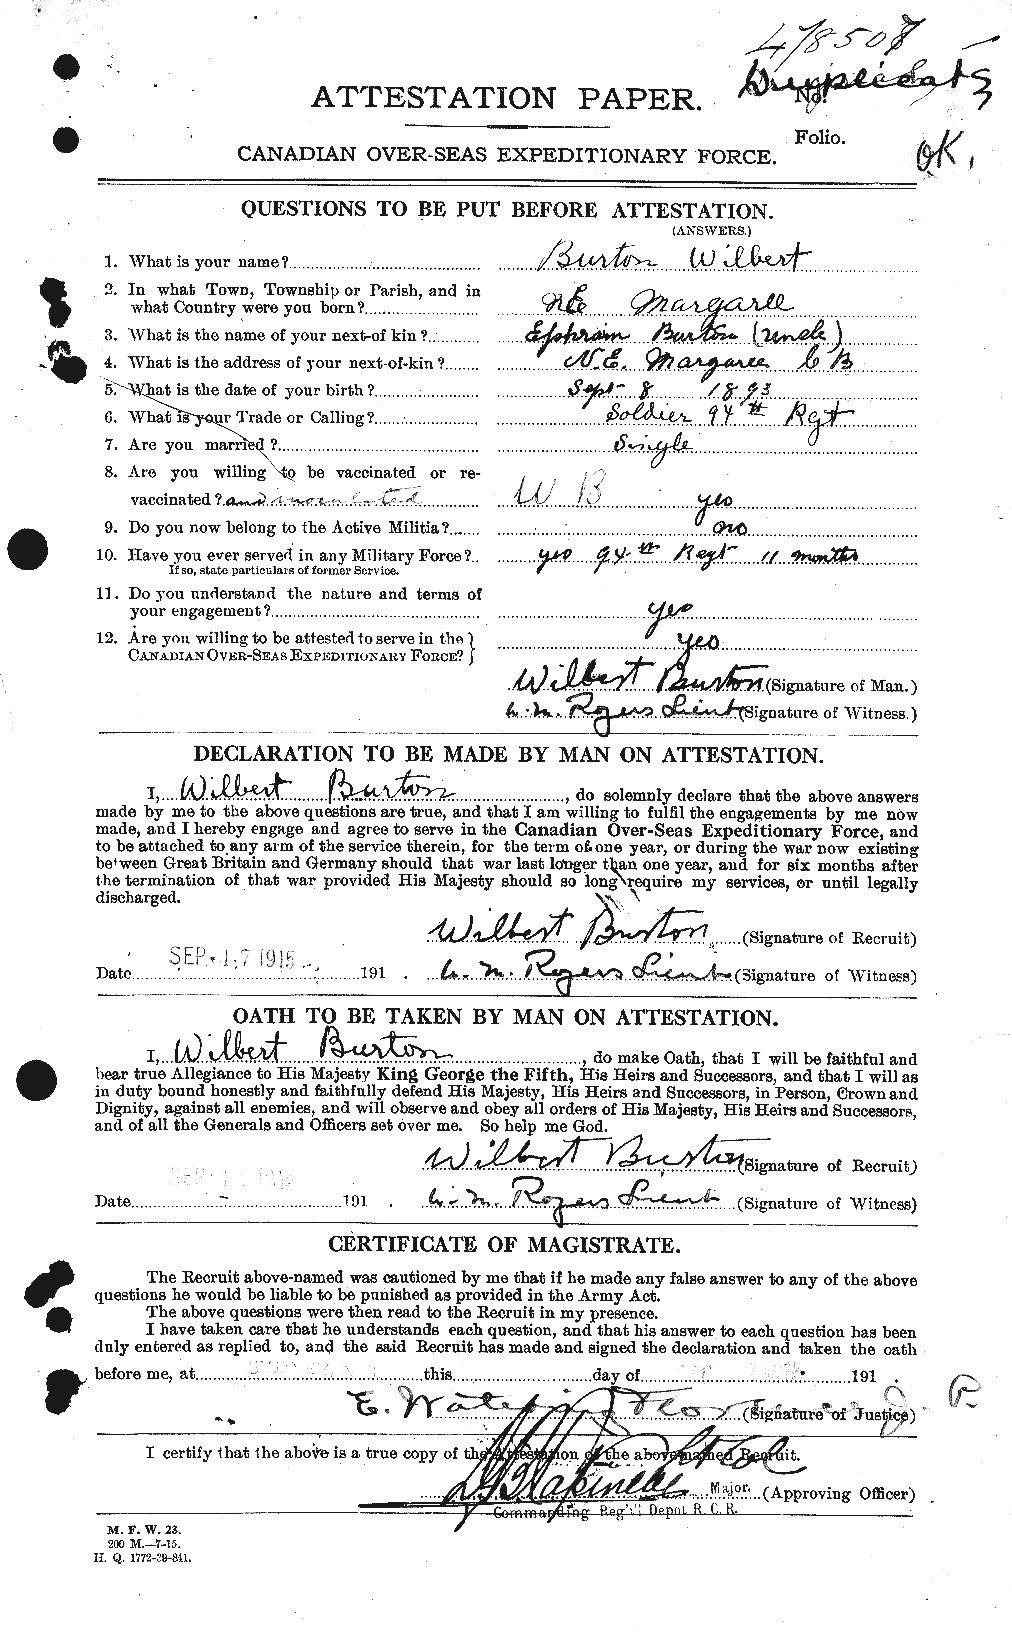 Personnel Records of the First World War - CEF 272736a